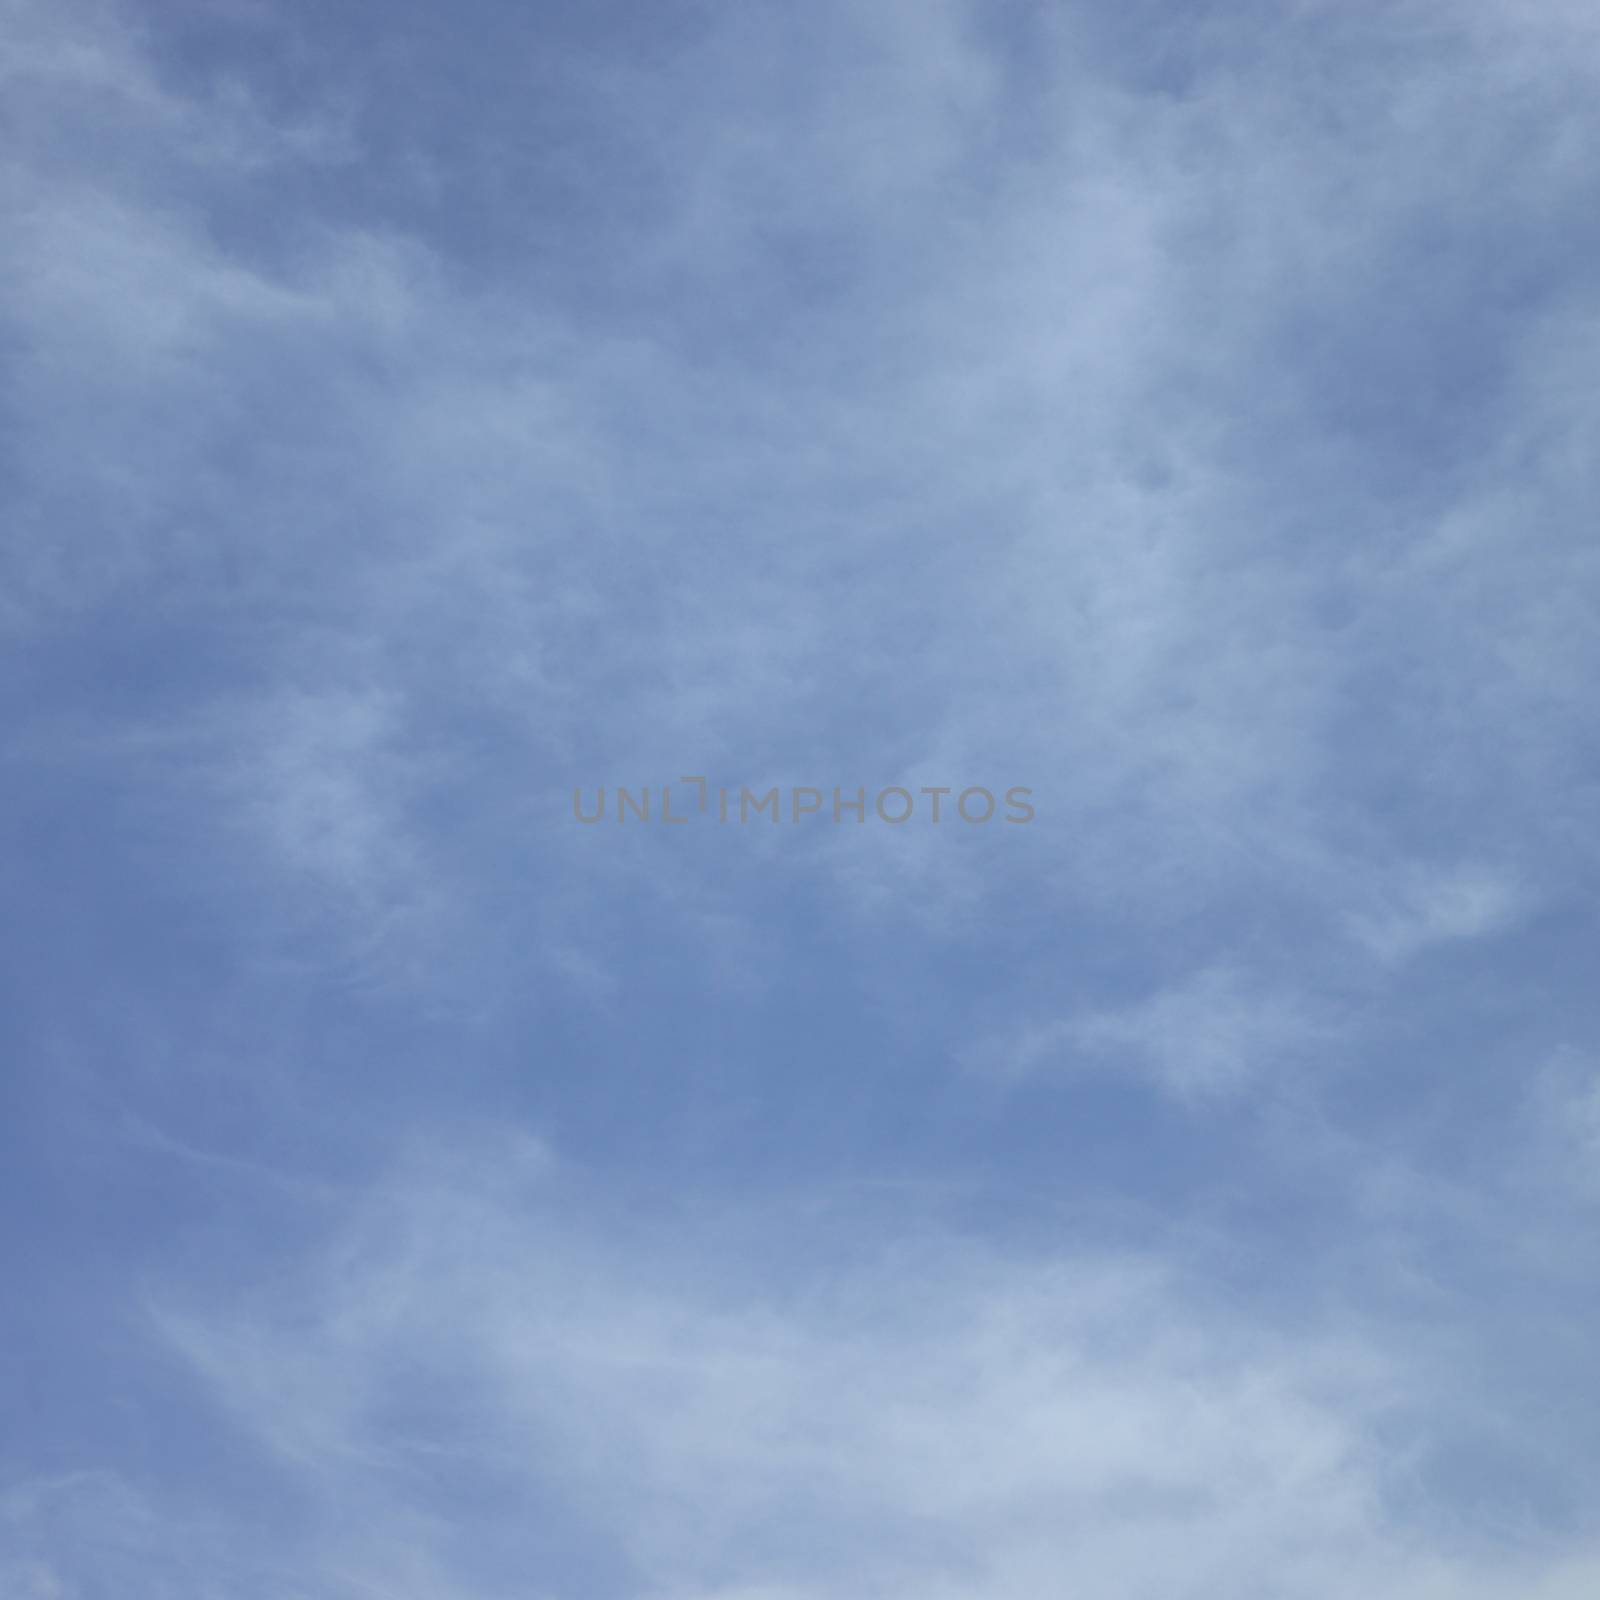 Soft white clouds in the blue sky